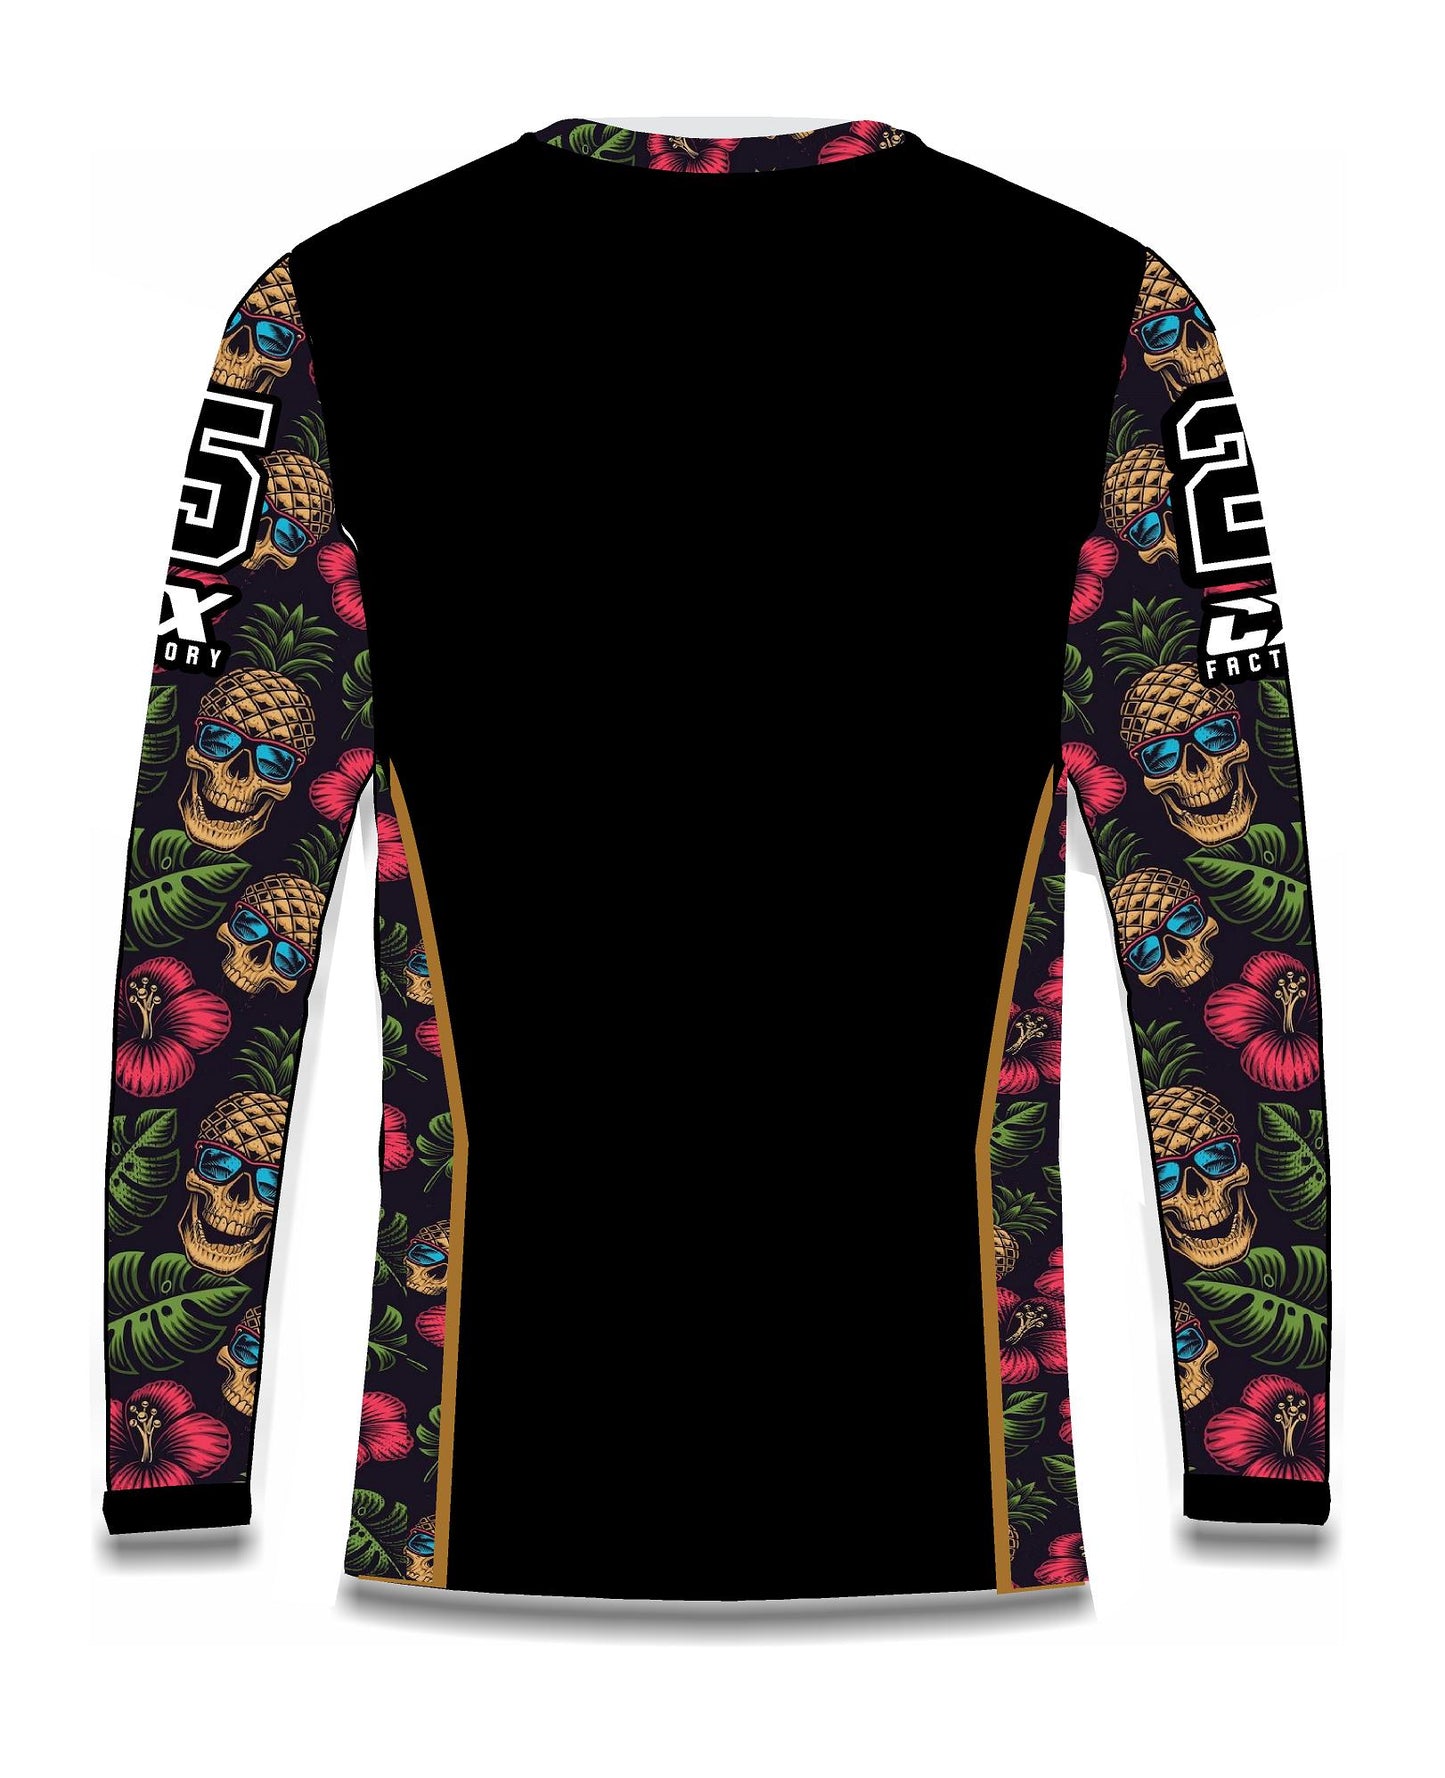 CX Factory Classy Misfit Jersey - Pineapple Express